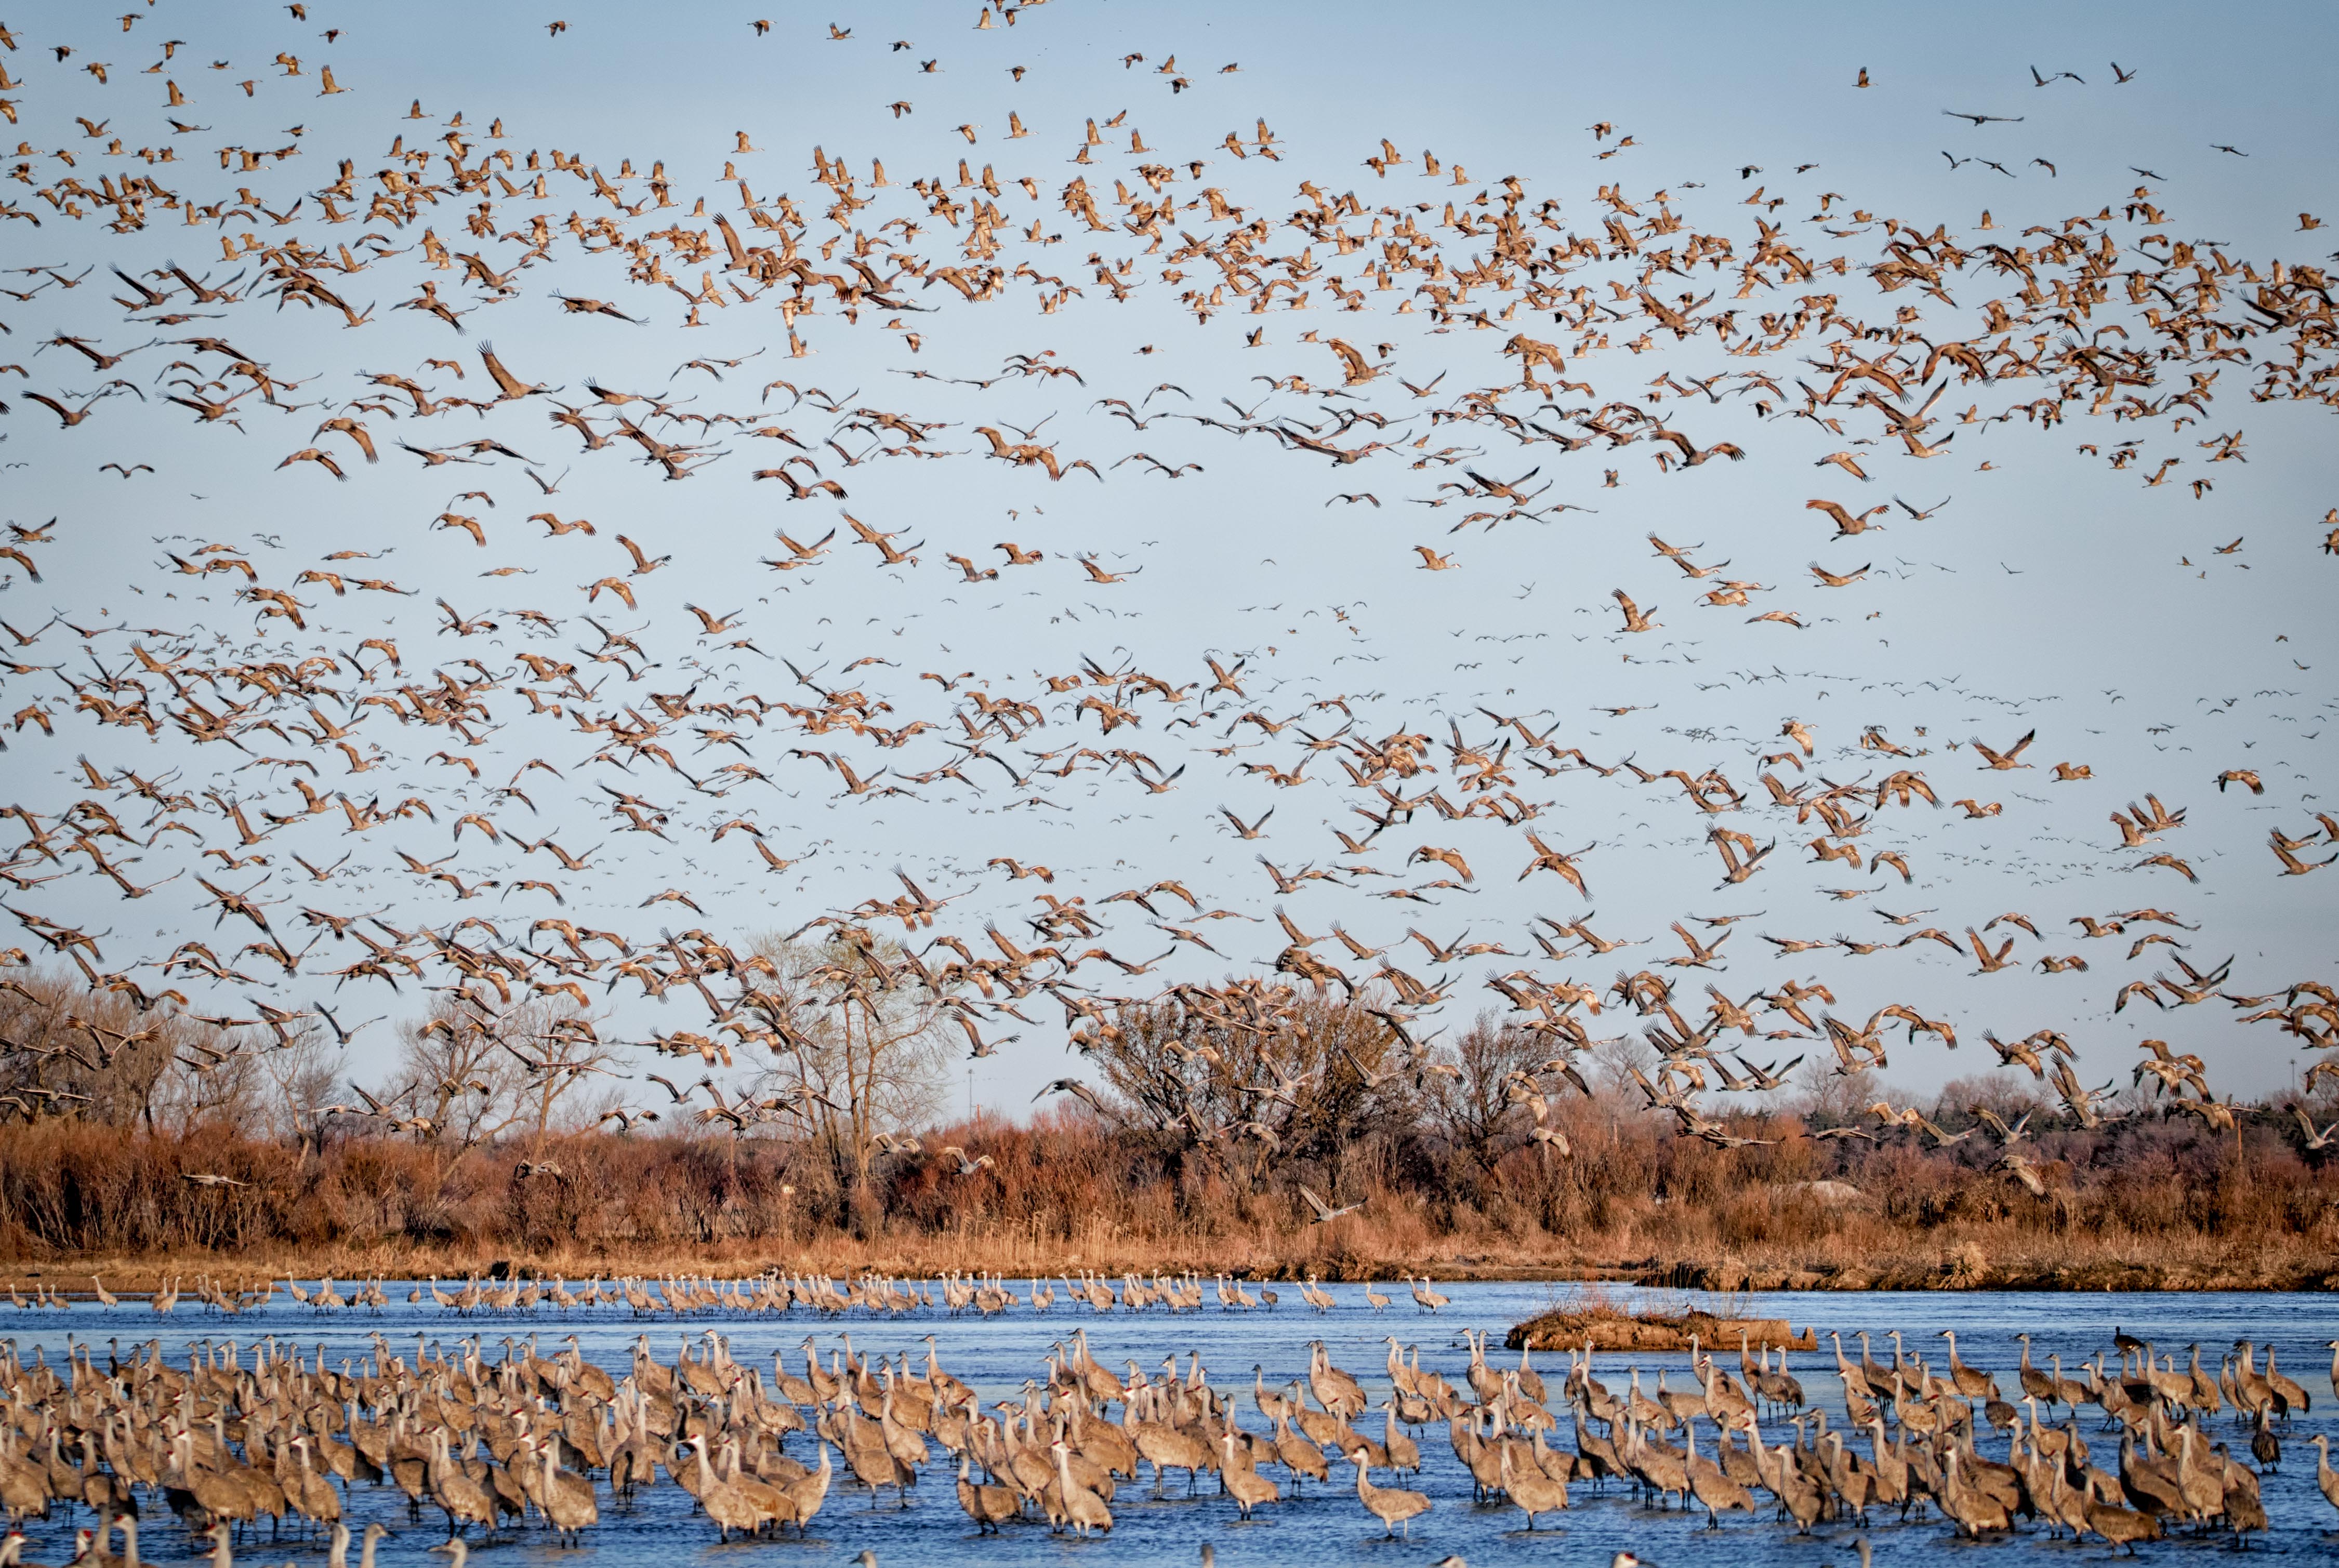 Every spring, 400,000 to 600,000 sandhill cranes (that’s 80% of all the cranes on the planet) congregate along the Platte River in Nebraska to feast on waste grain in the empty cornfields before heading north to their Arctic and sub-Arctic nesting grounds.